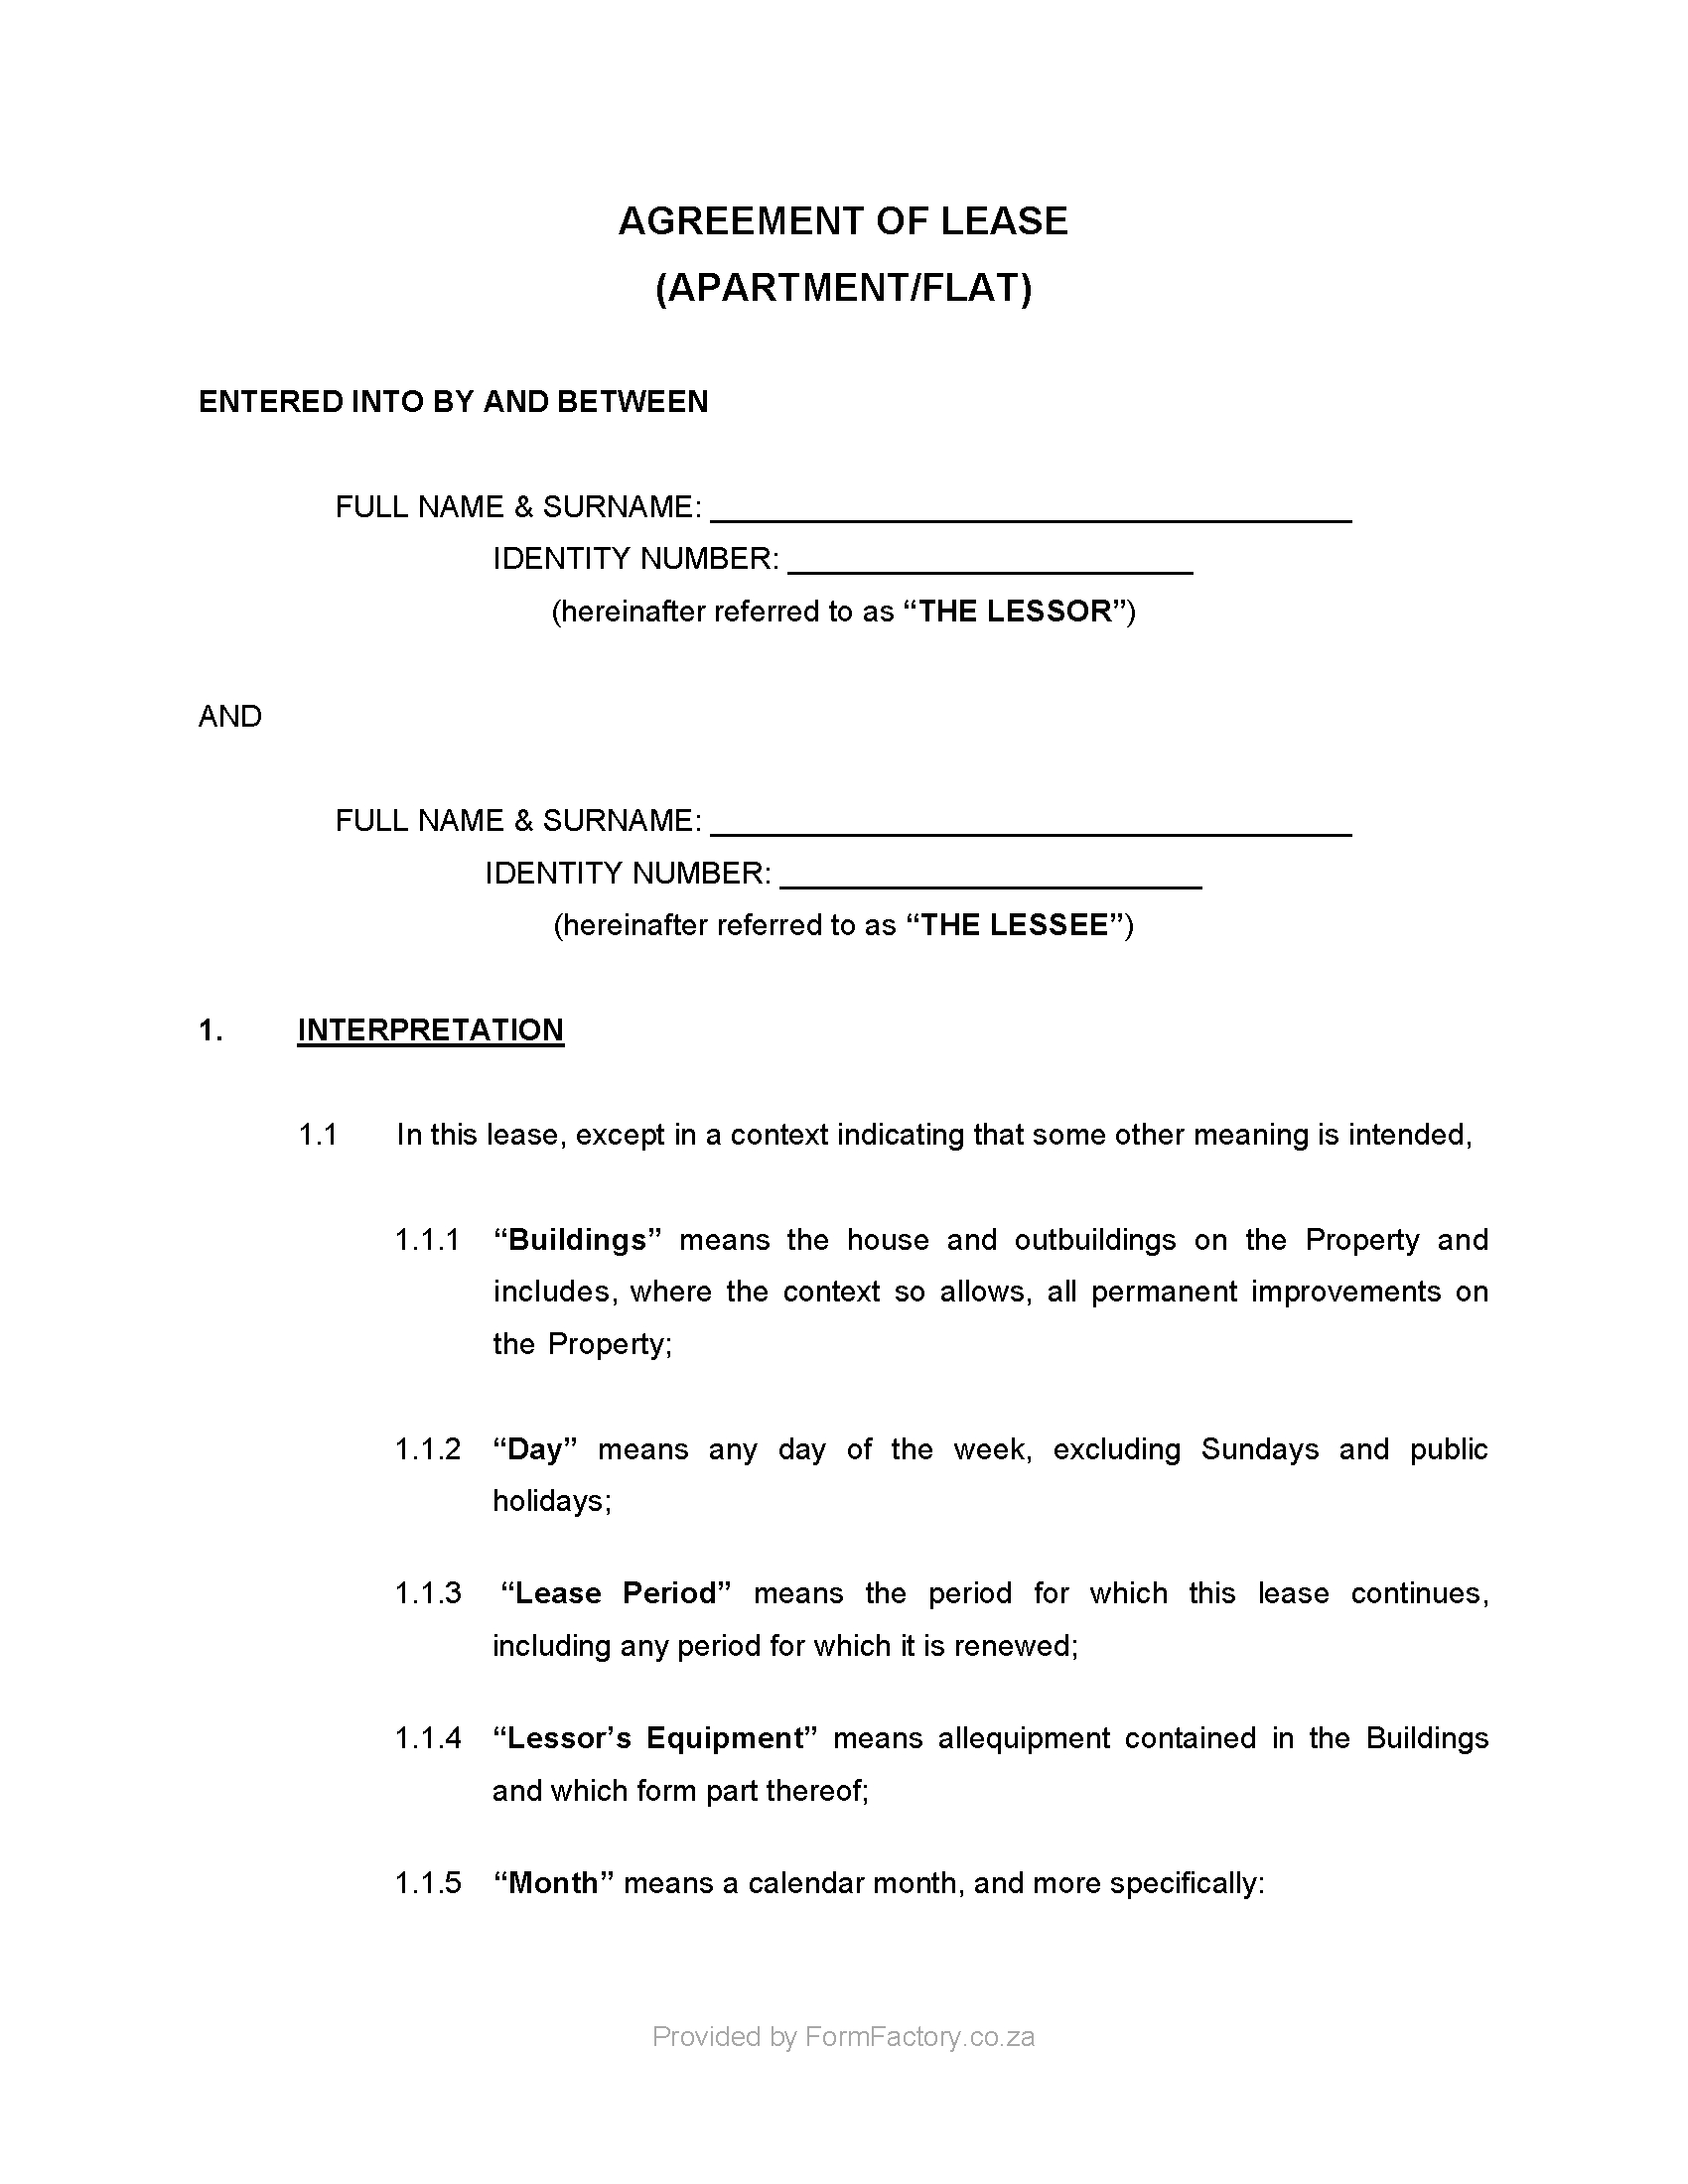 Download Residential Lease Agreement Template - Formfactory Calendar Month Notice Period South Africa